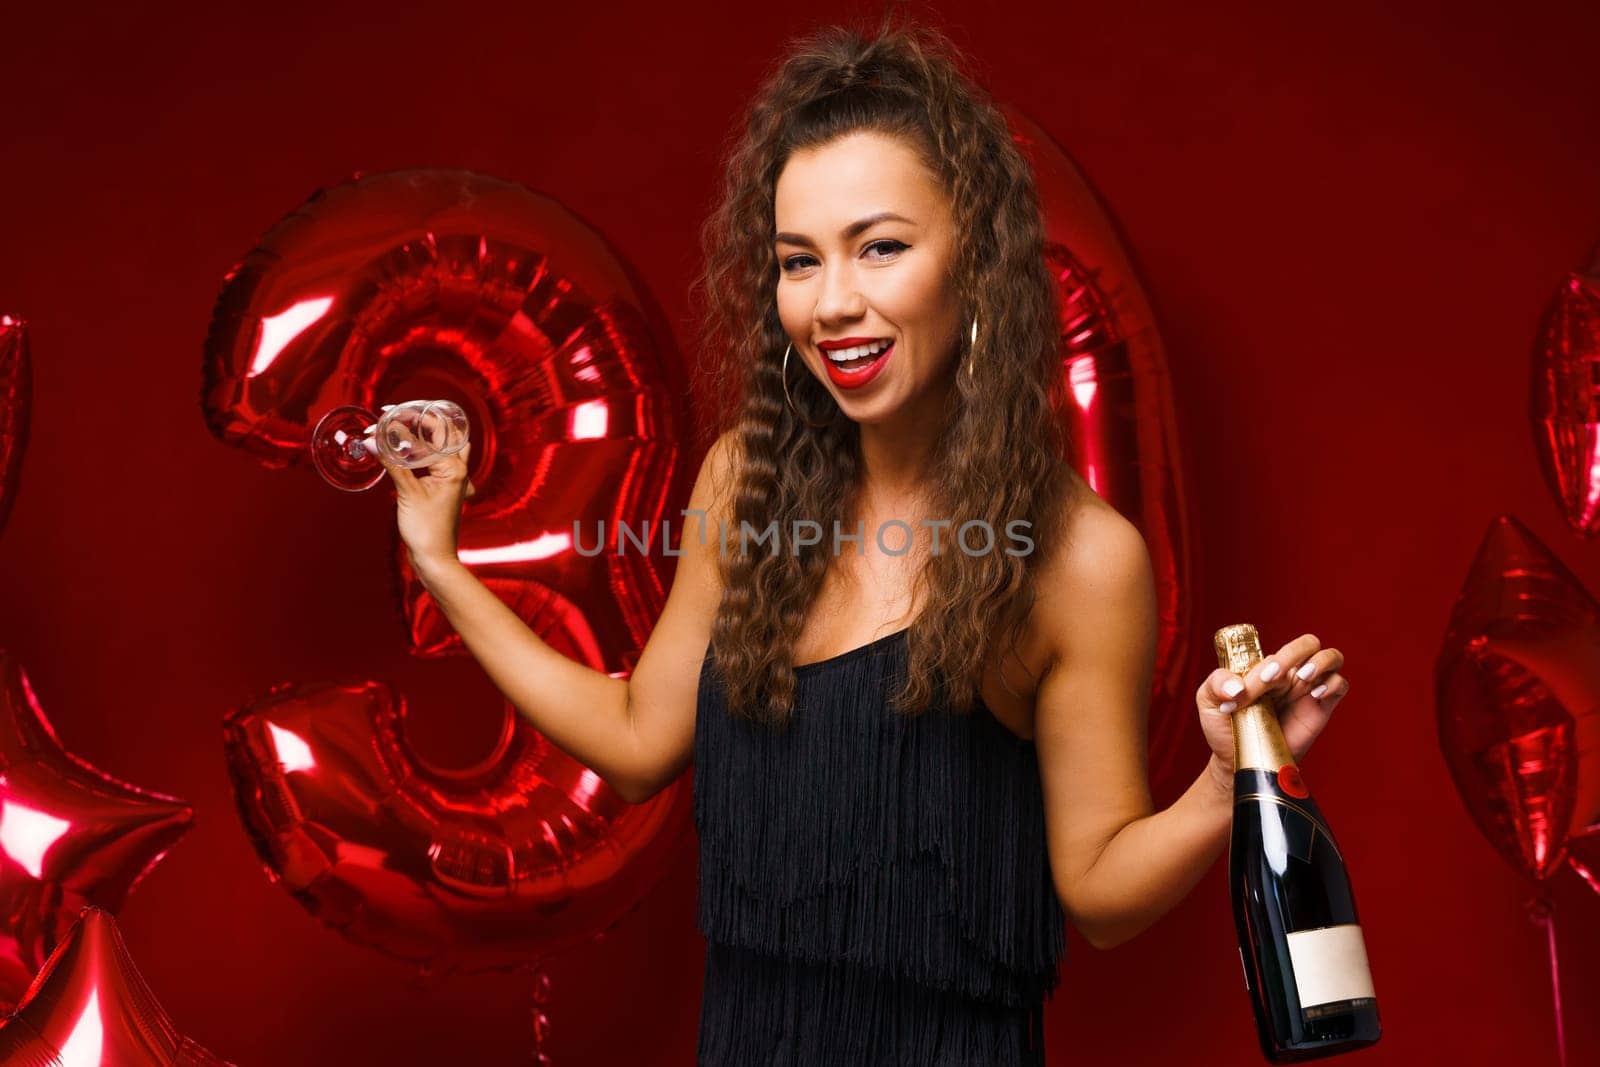 Beautiful woman posing on a red background with balloons by EkaterinaPereslavtseva